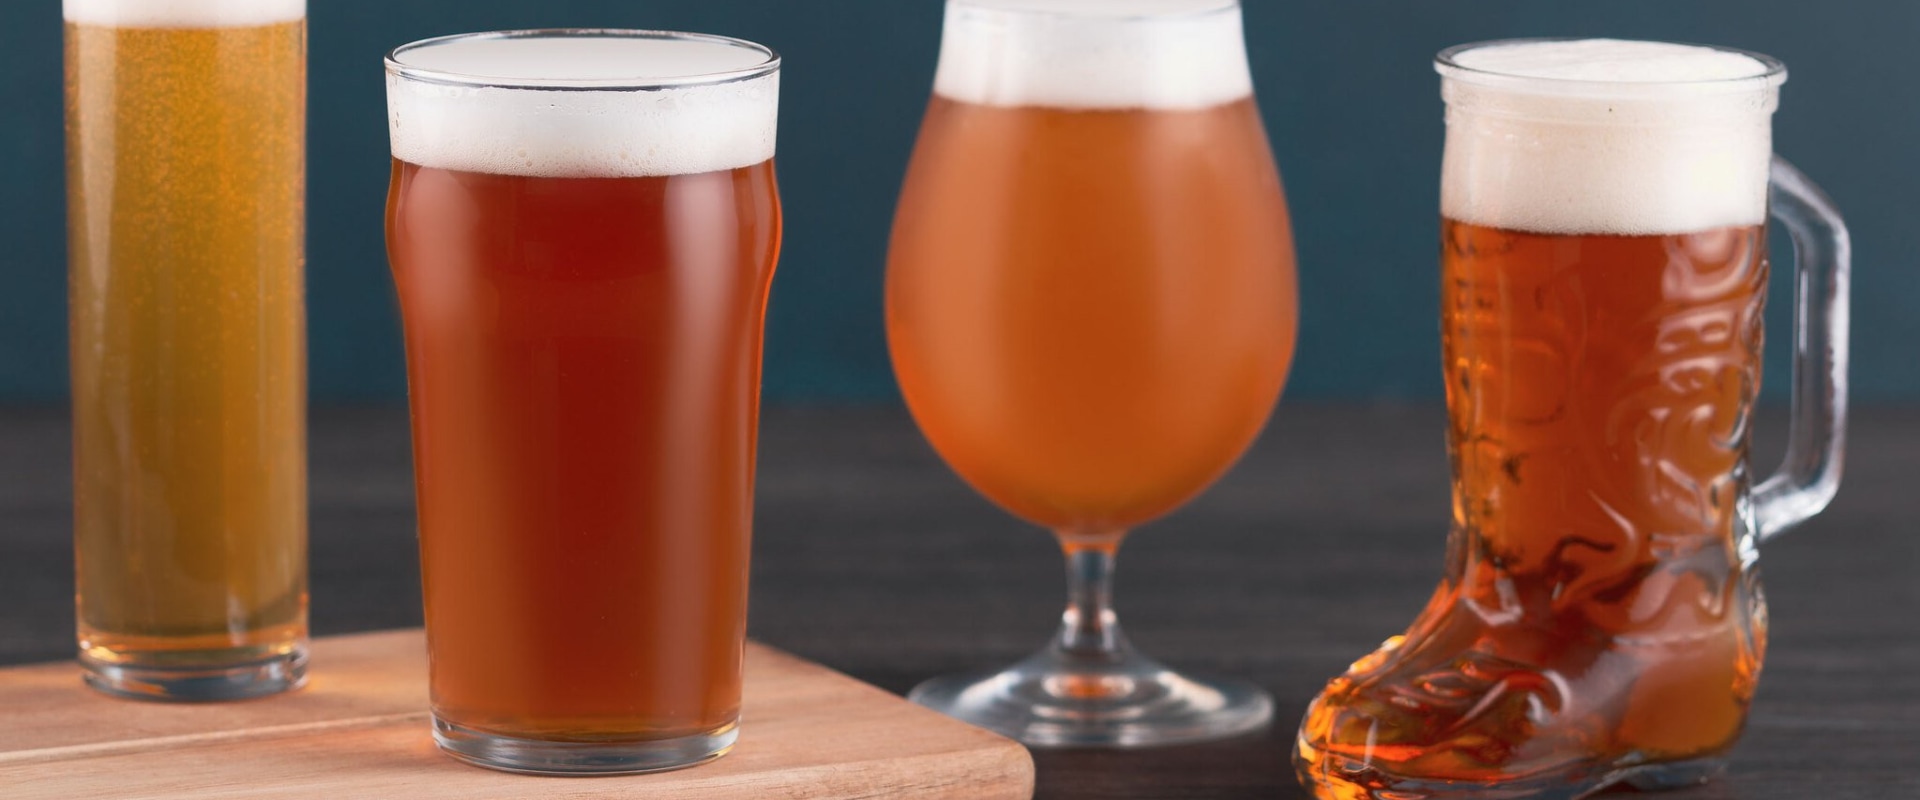 Craft Beer Accessories: The Best Glasses for Different Types of Craft Beer